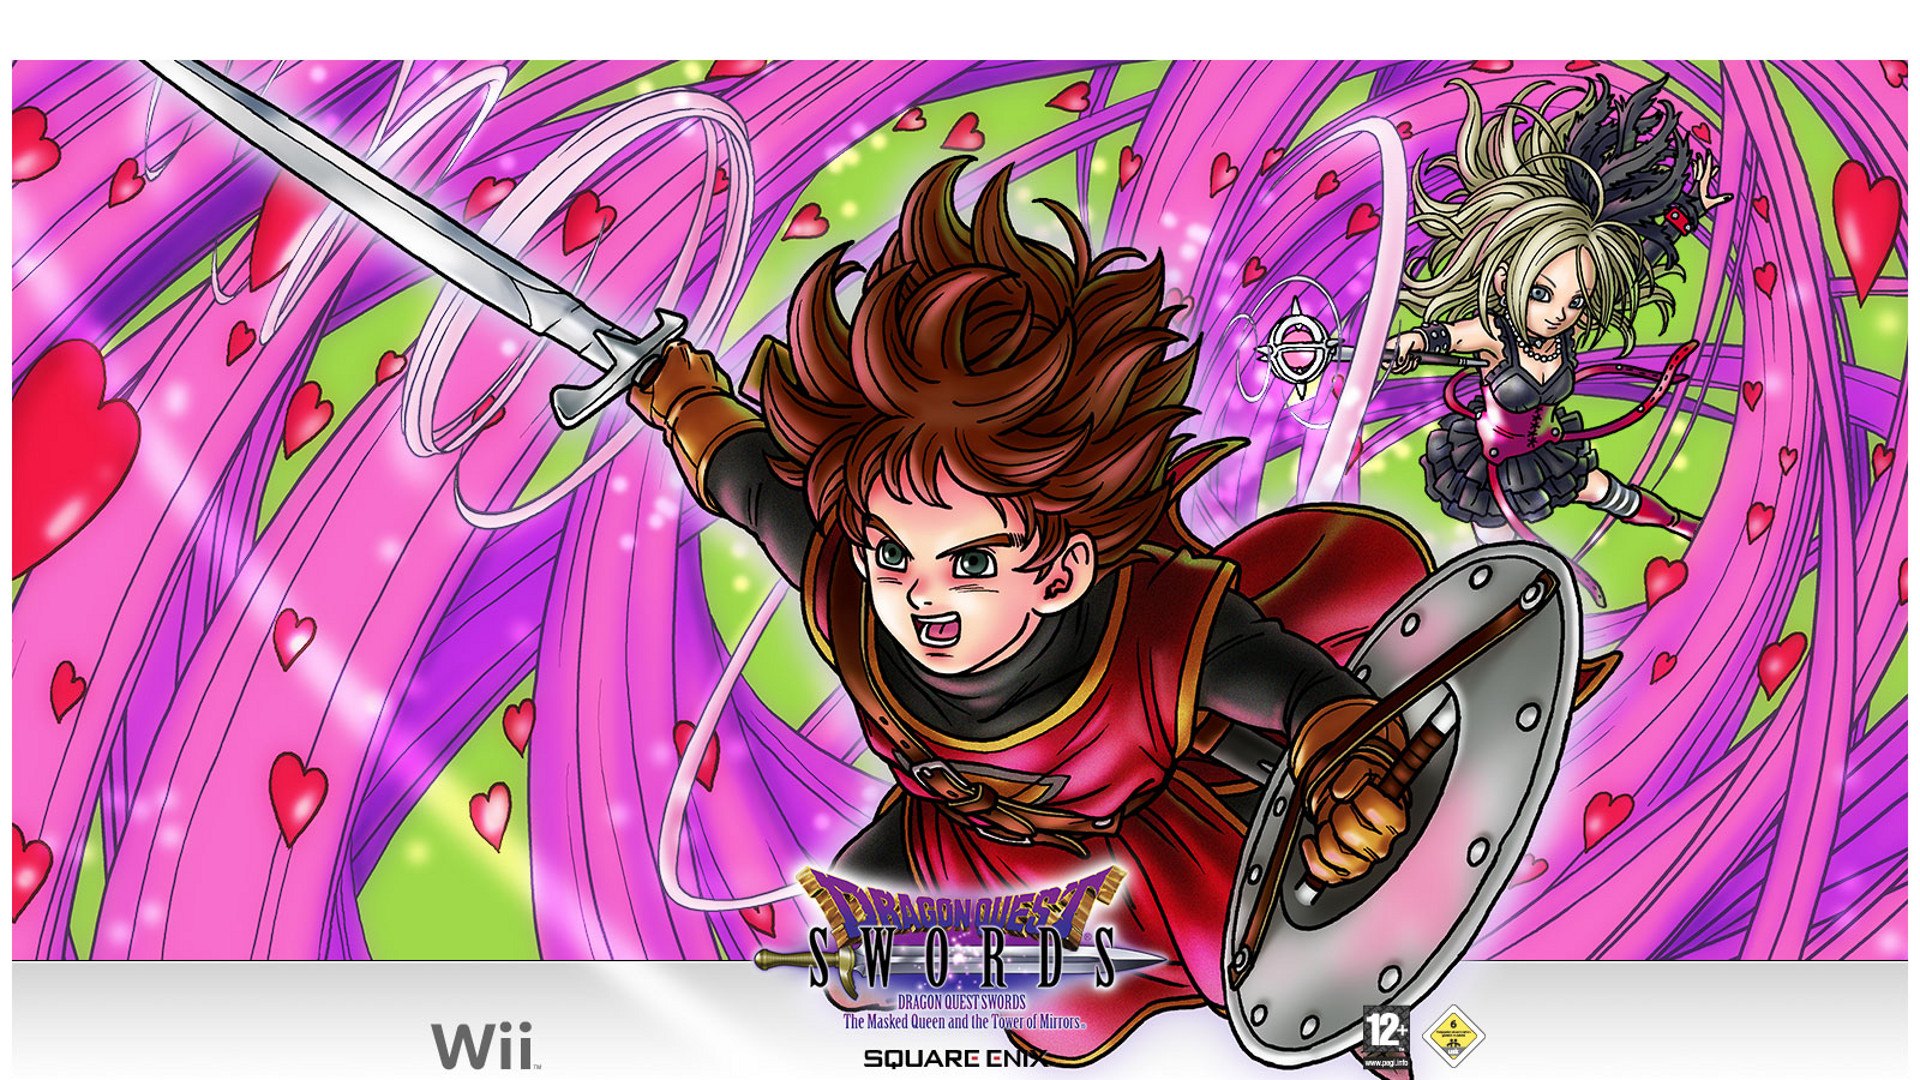 video game, dragon quest swords: the masked queen and the tower of mirro, dragon quest